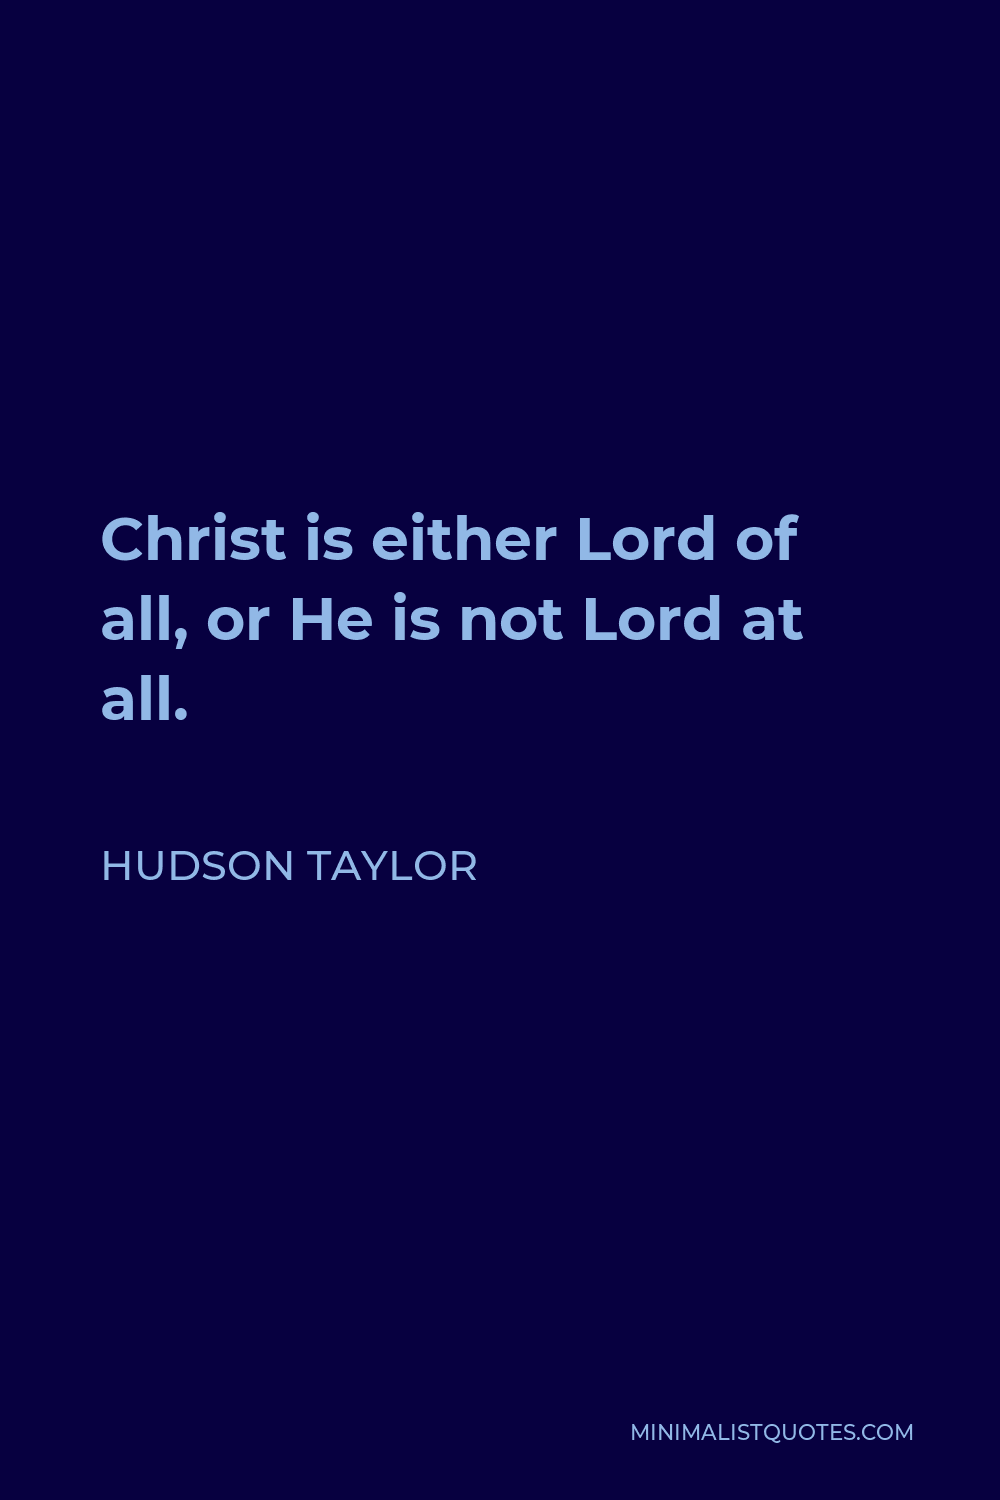 Hudson Taylor Quote - Christ is either Lord of all, or He is not Lord at all.